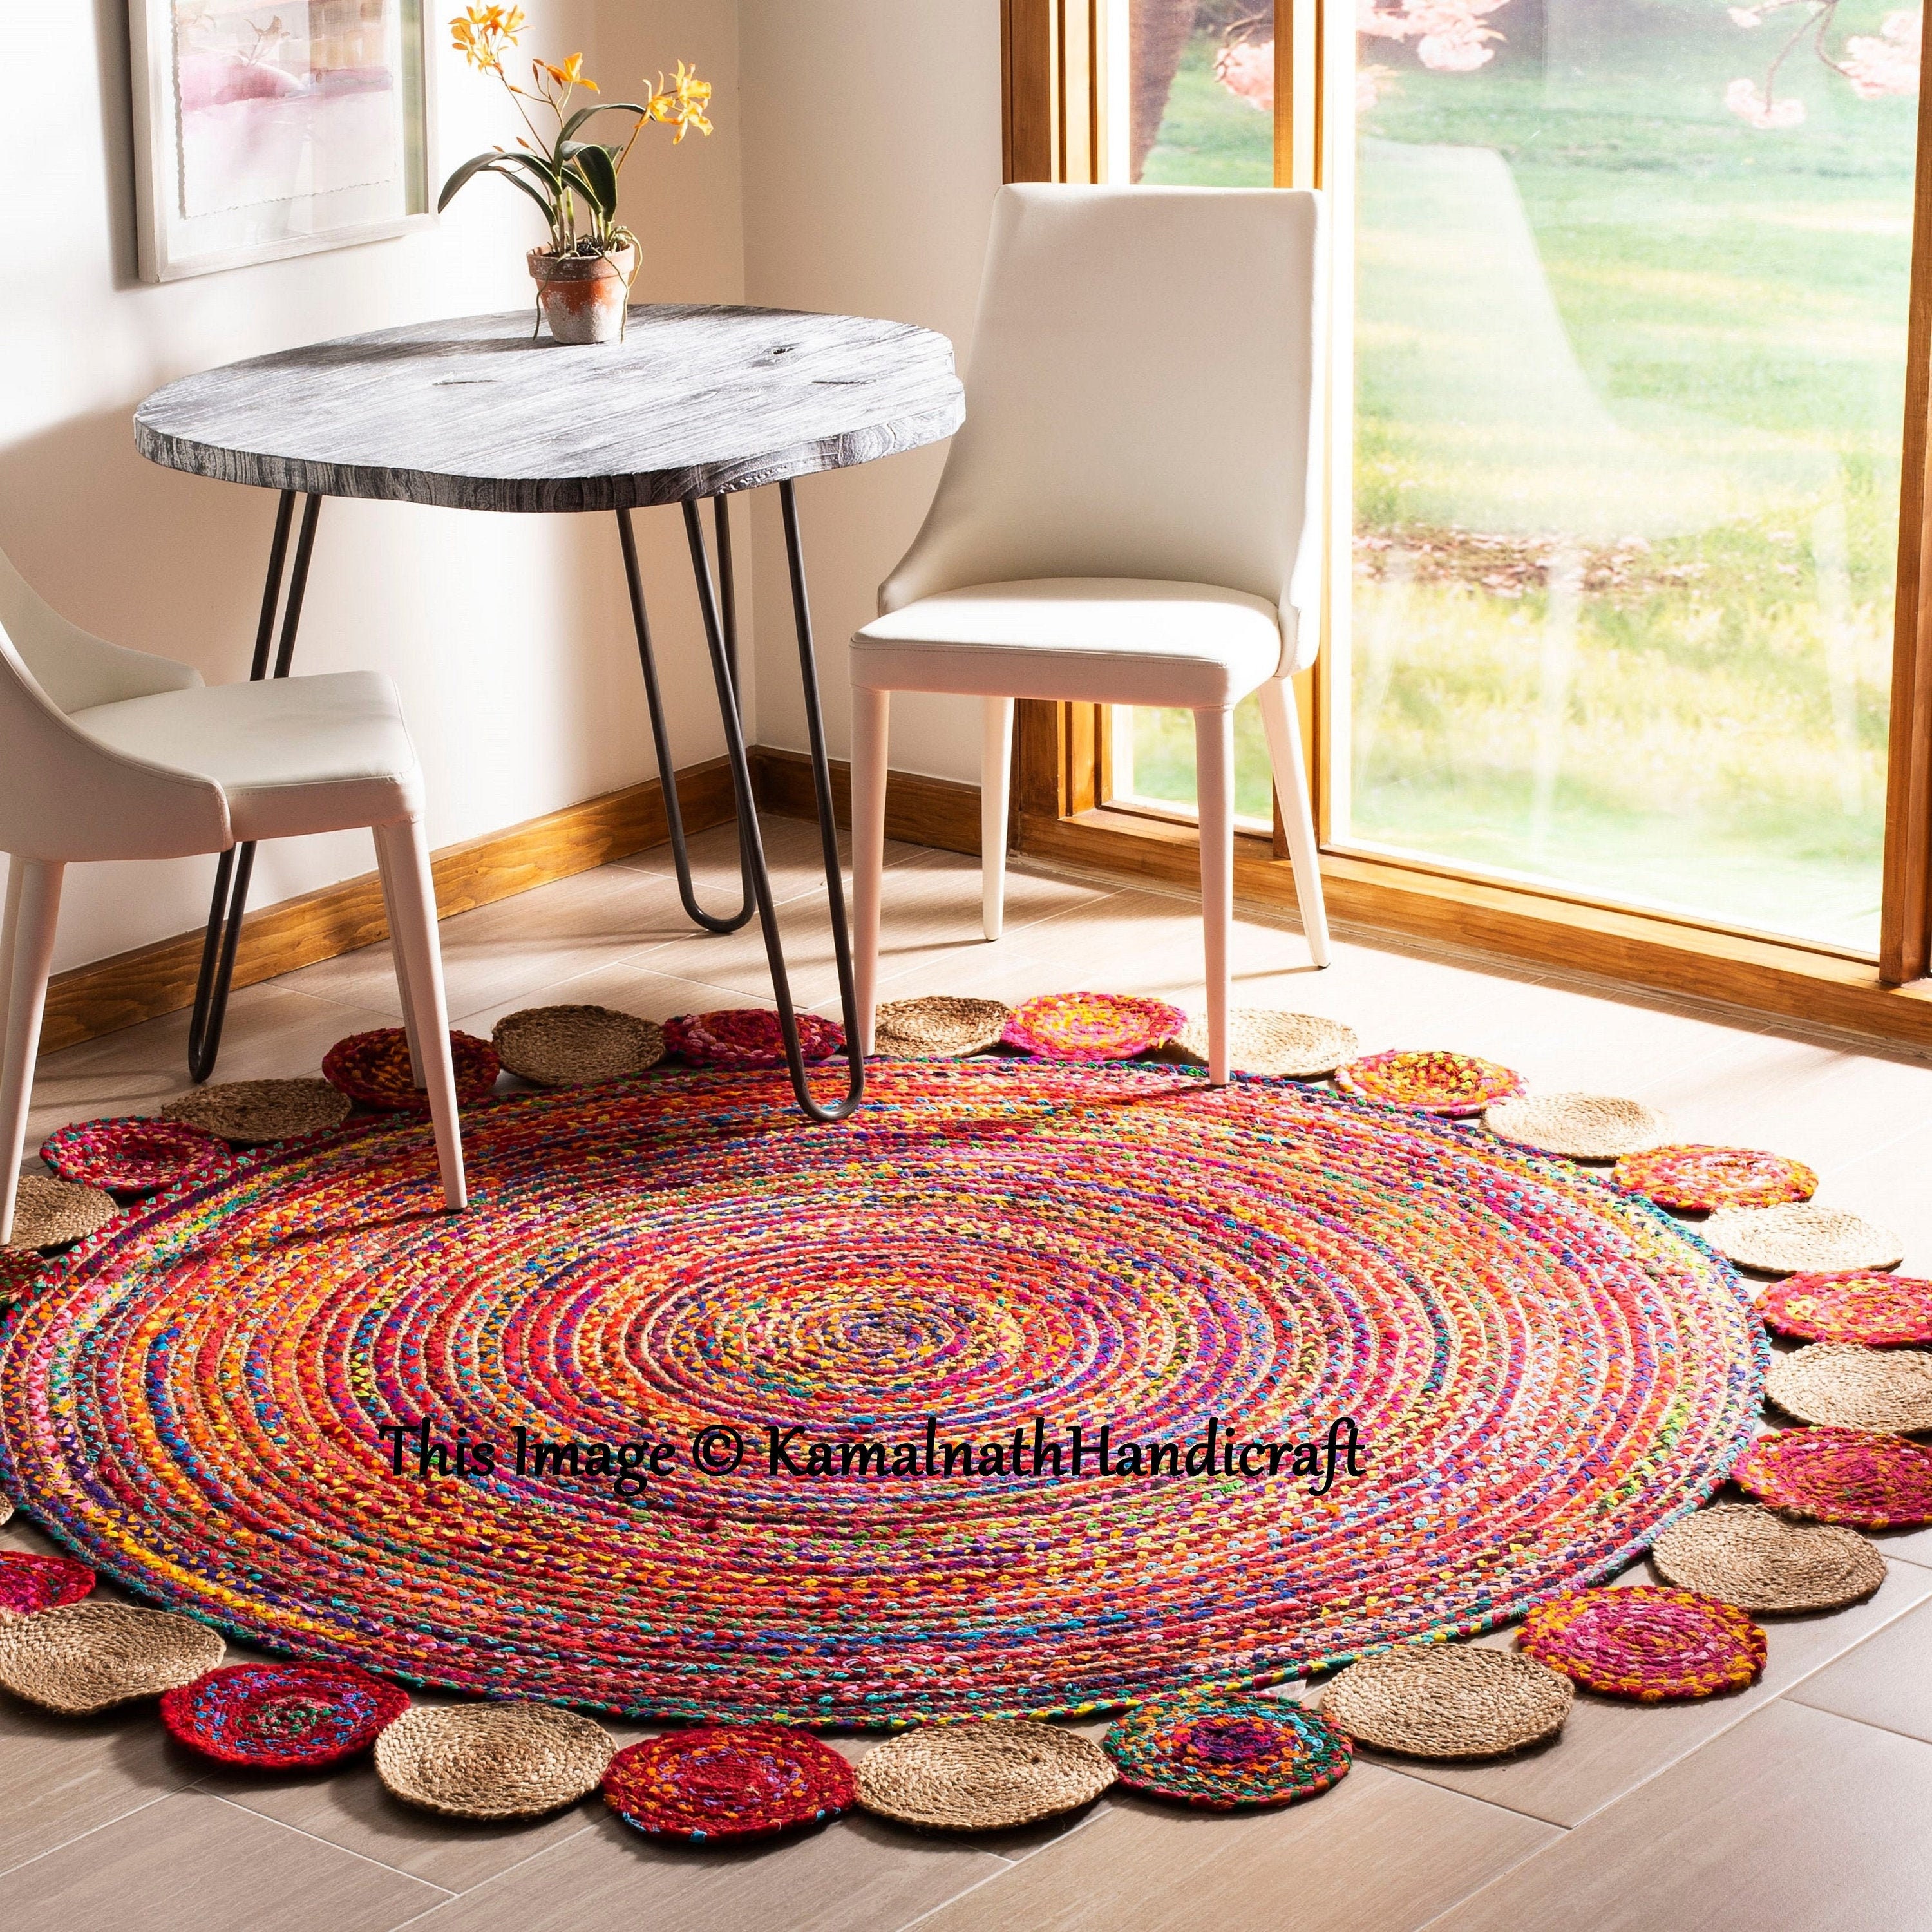 4x4 feet Indian Hand Braided Bohemian Cotton Chindi Area Rug Multi Color Home Decor Rugs Cotton Area Rugs Round Shape Multi Braided Rug Rag